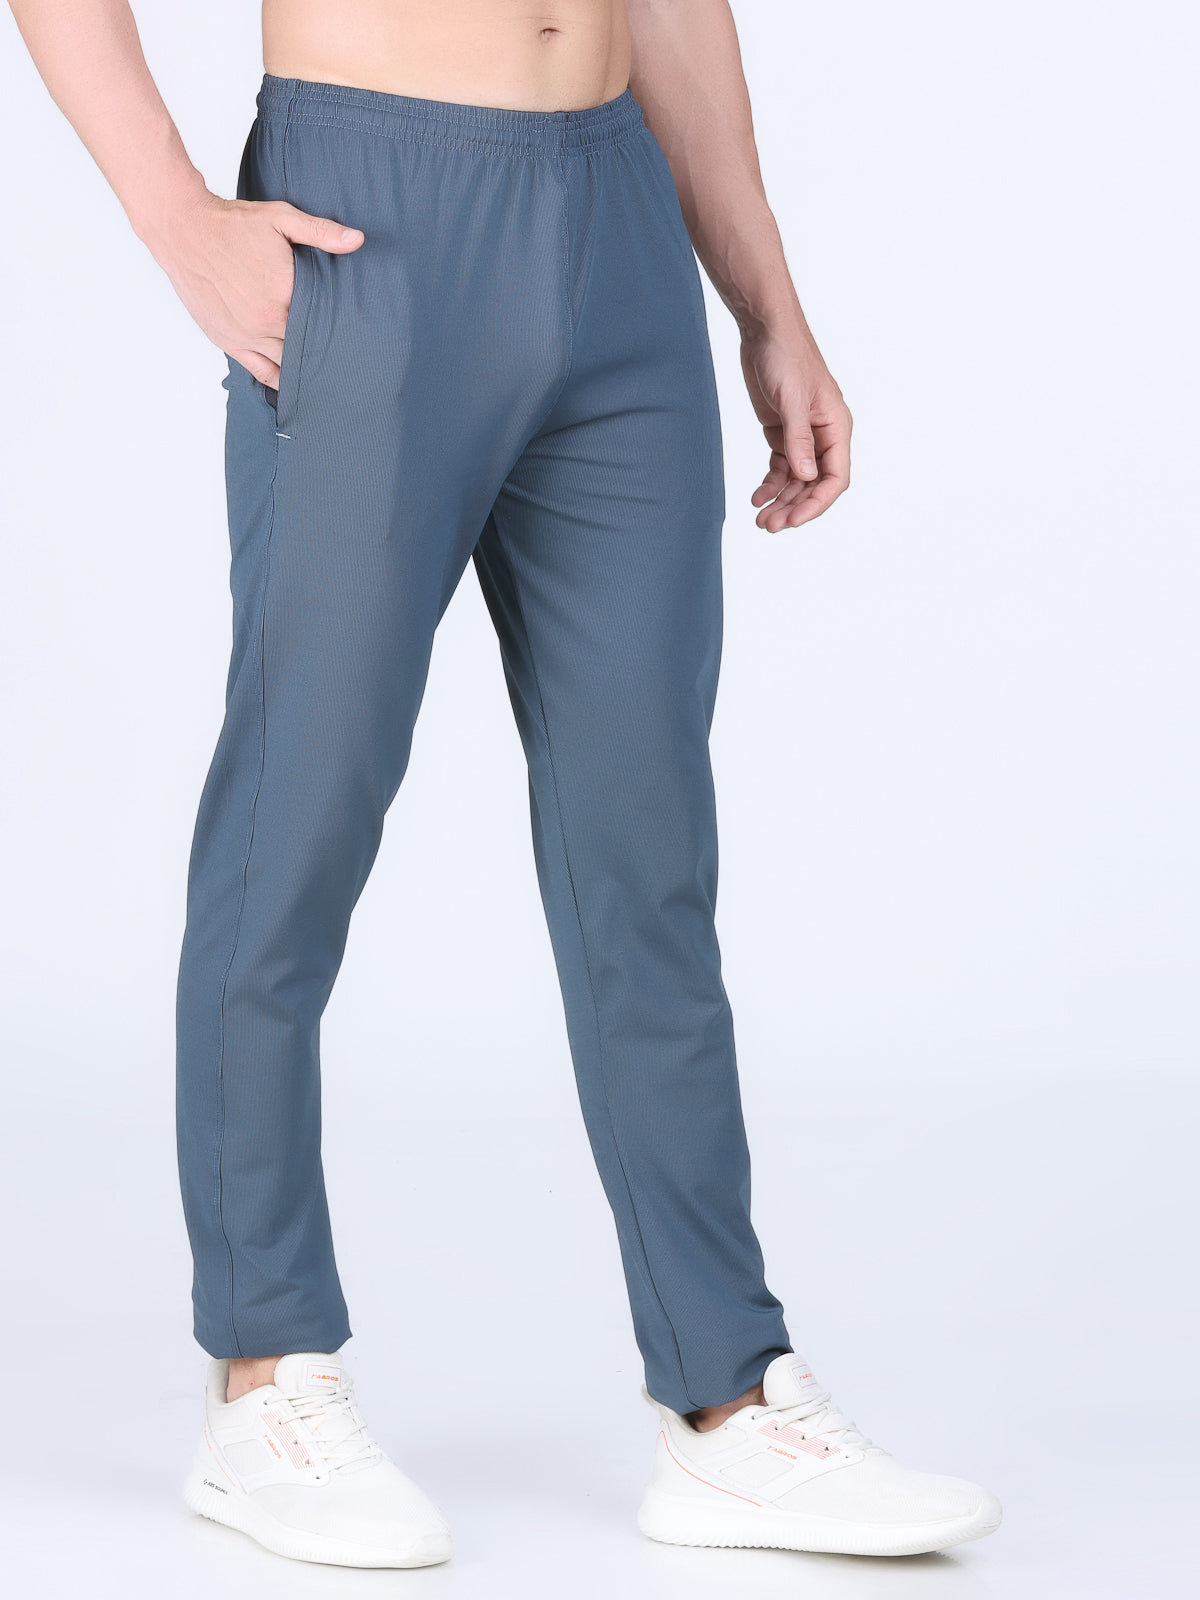 Combo of 2 Men's 4 Way Stretch Lining Dark Grey and Coffee Track Pant